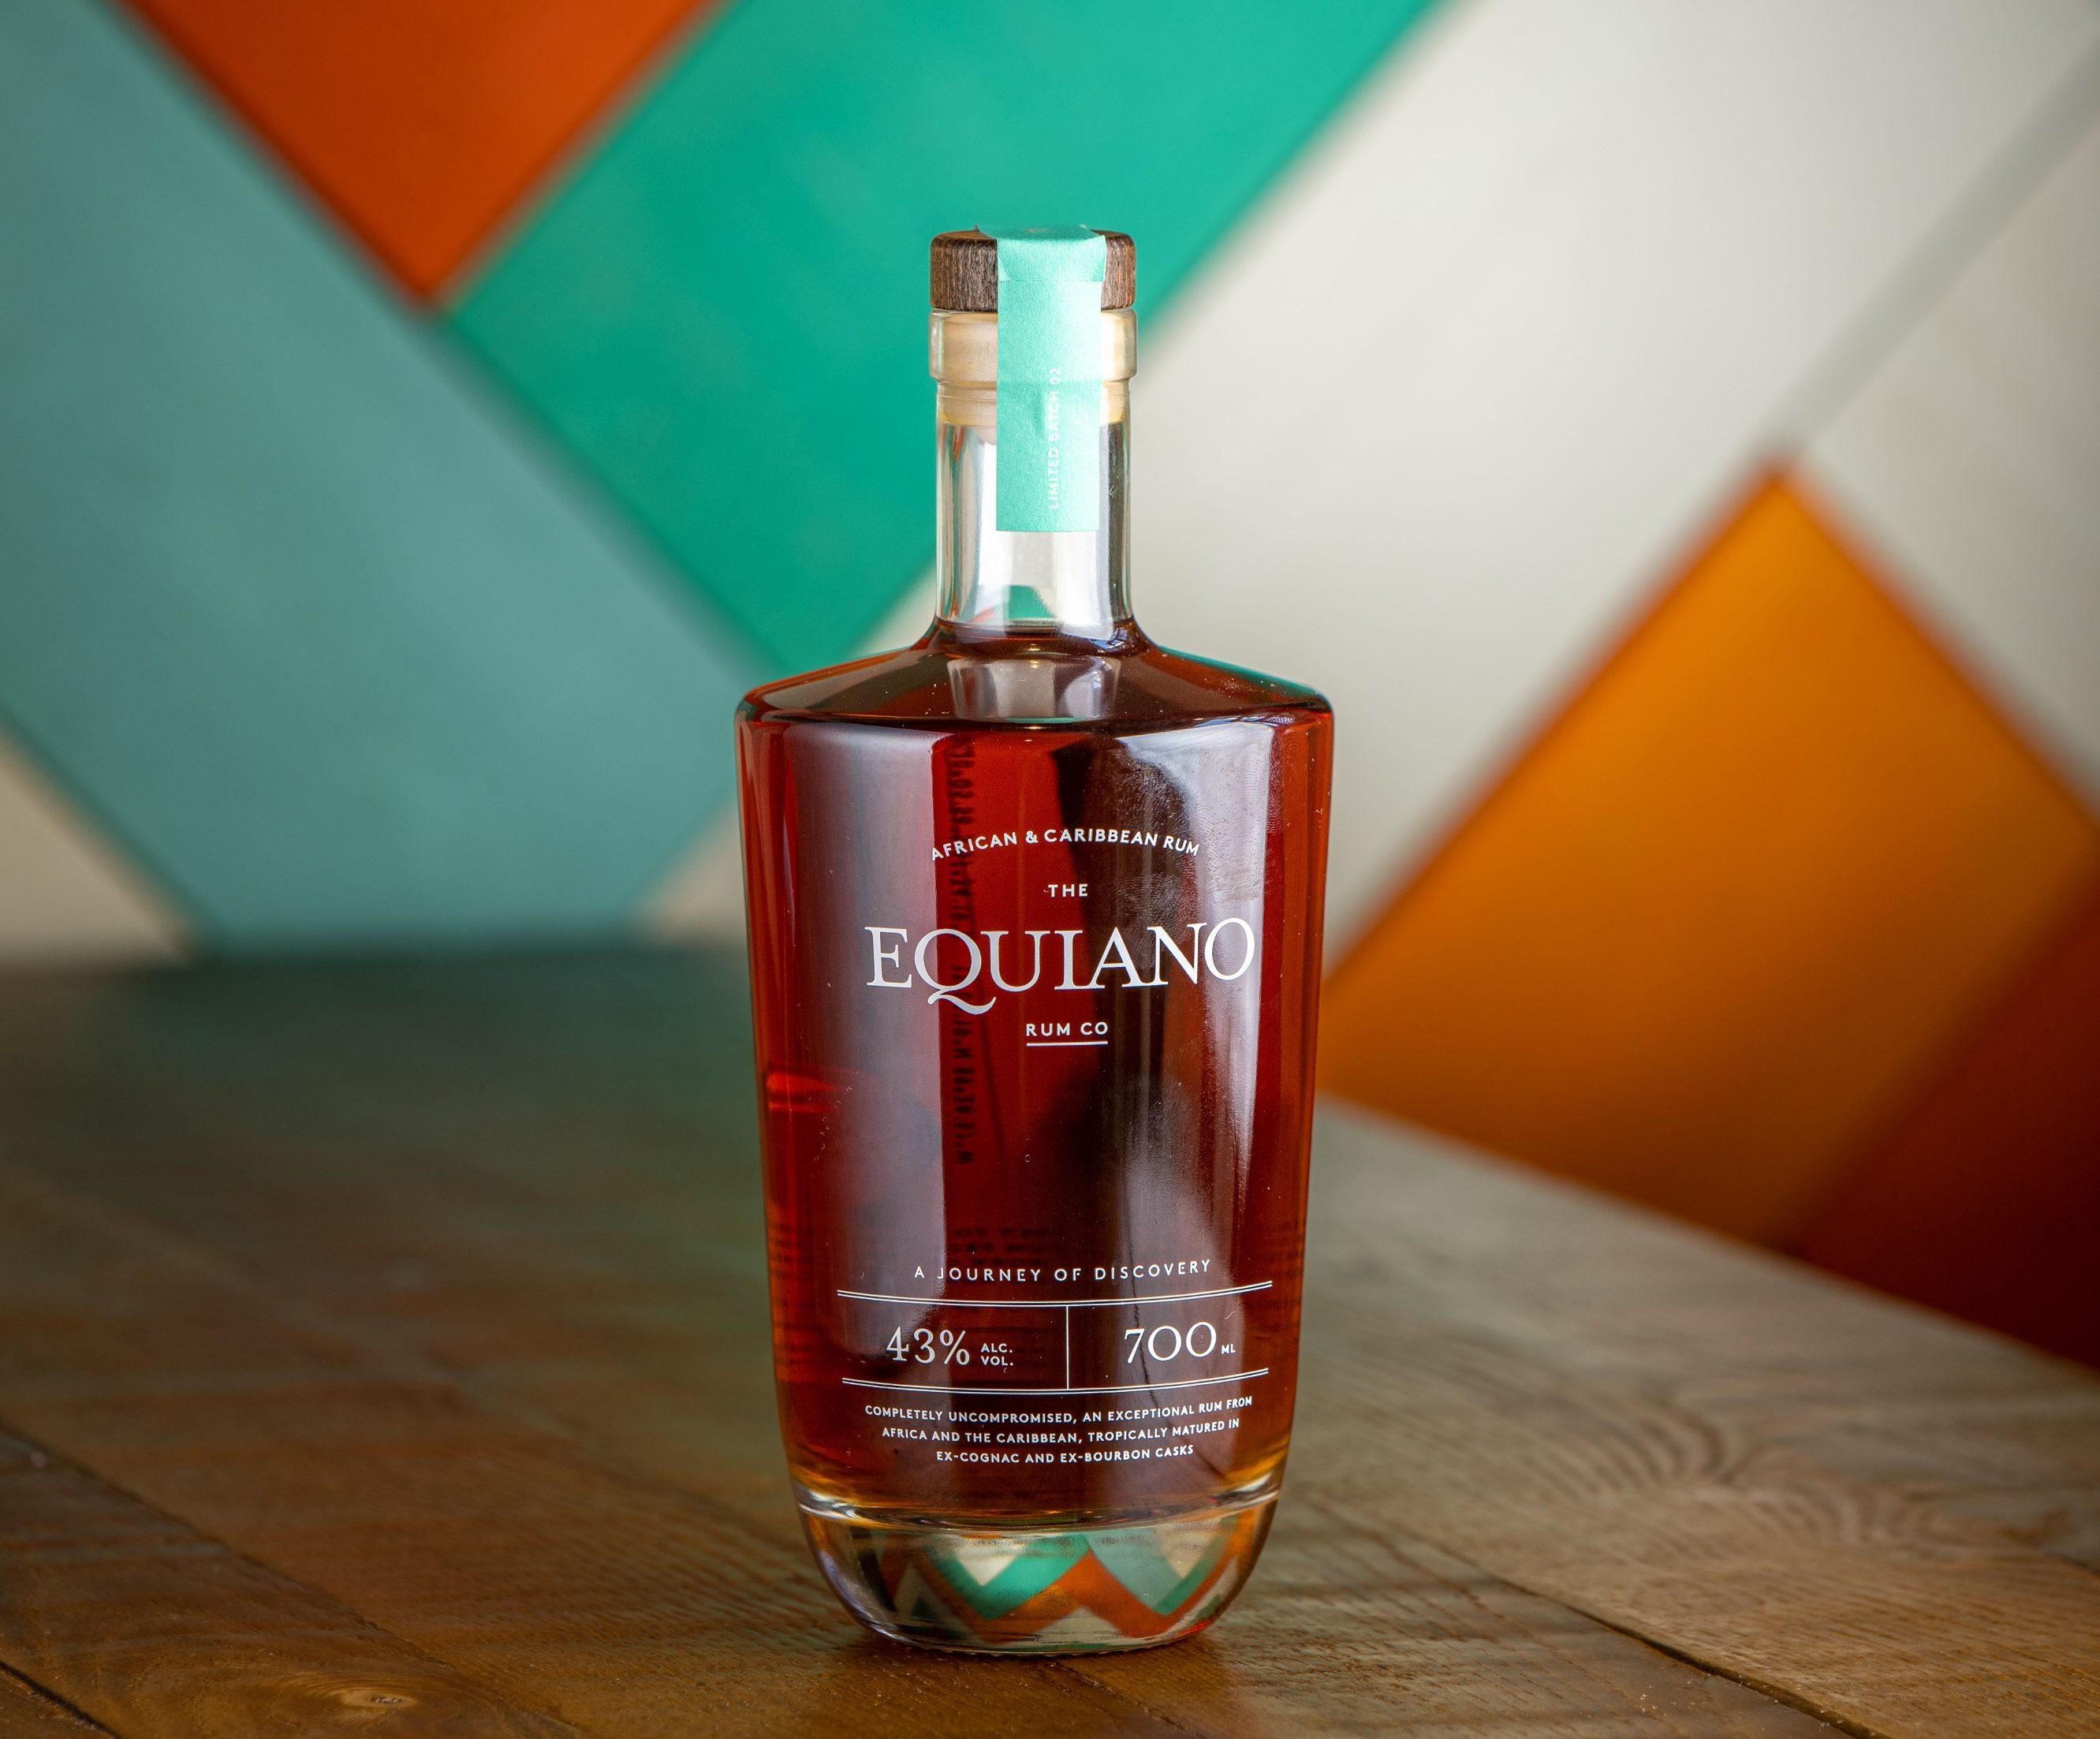 Bottle of Equiano Rum with colourful wooden background